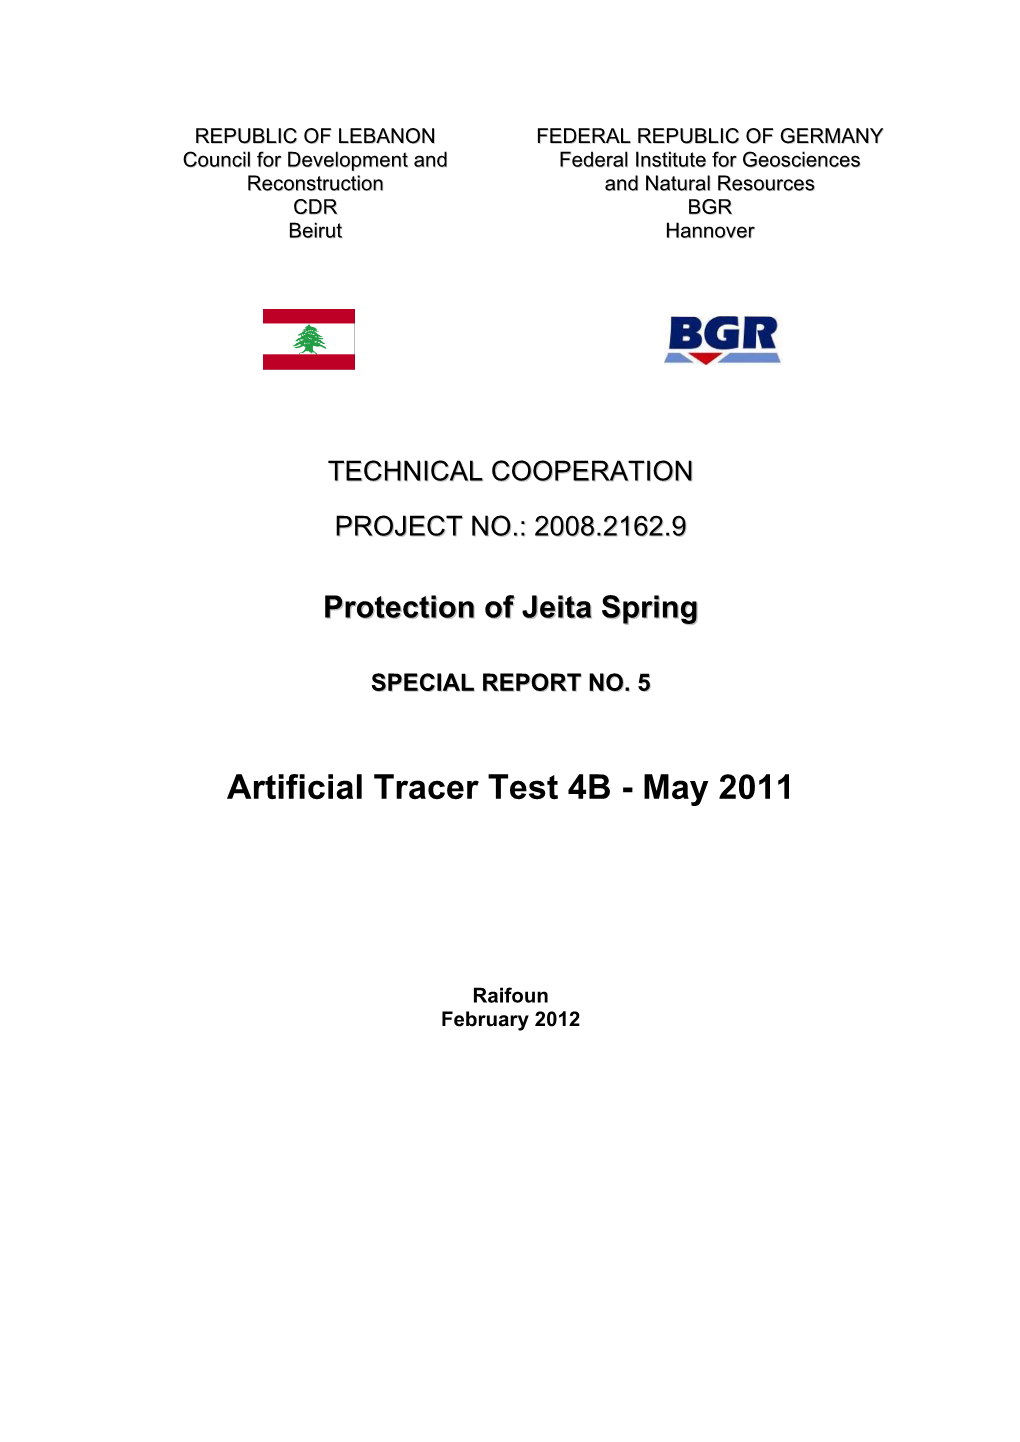 Artificial Tracer Tests- May 2011